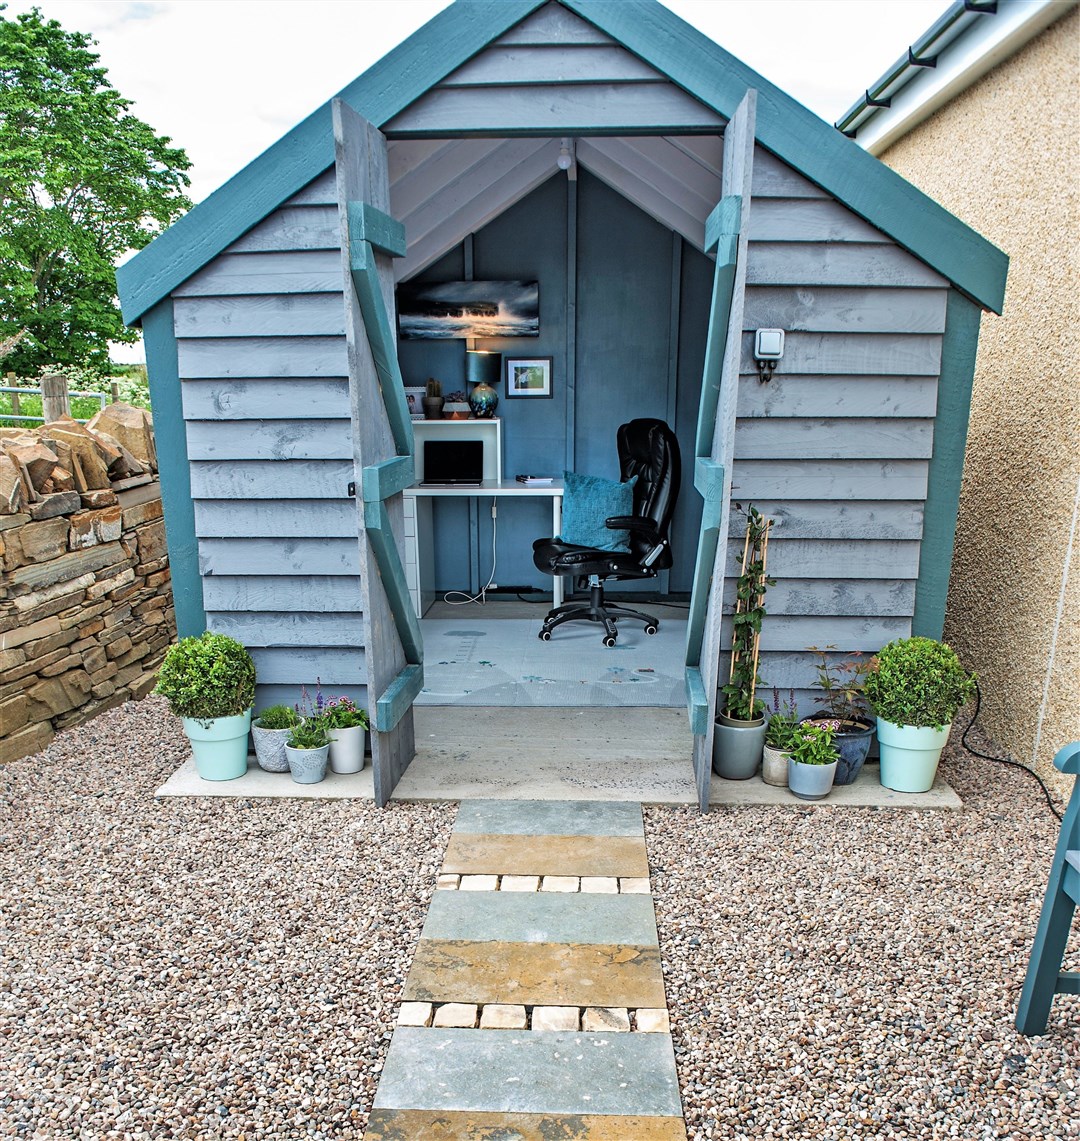 Claire designed and built the 'work from home' shed with some help from a friend.